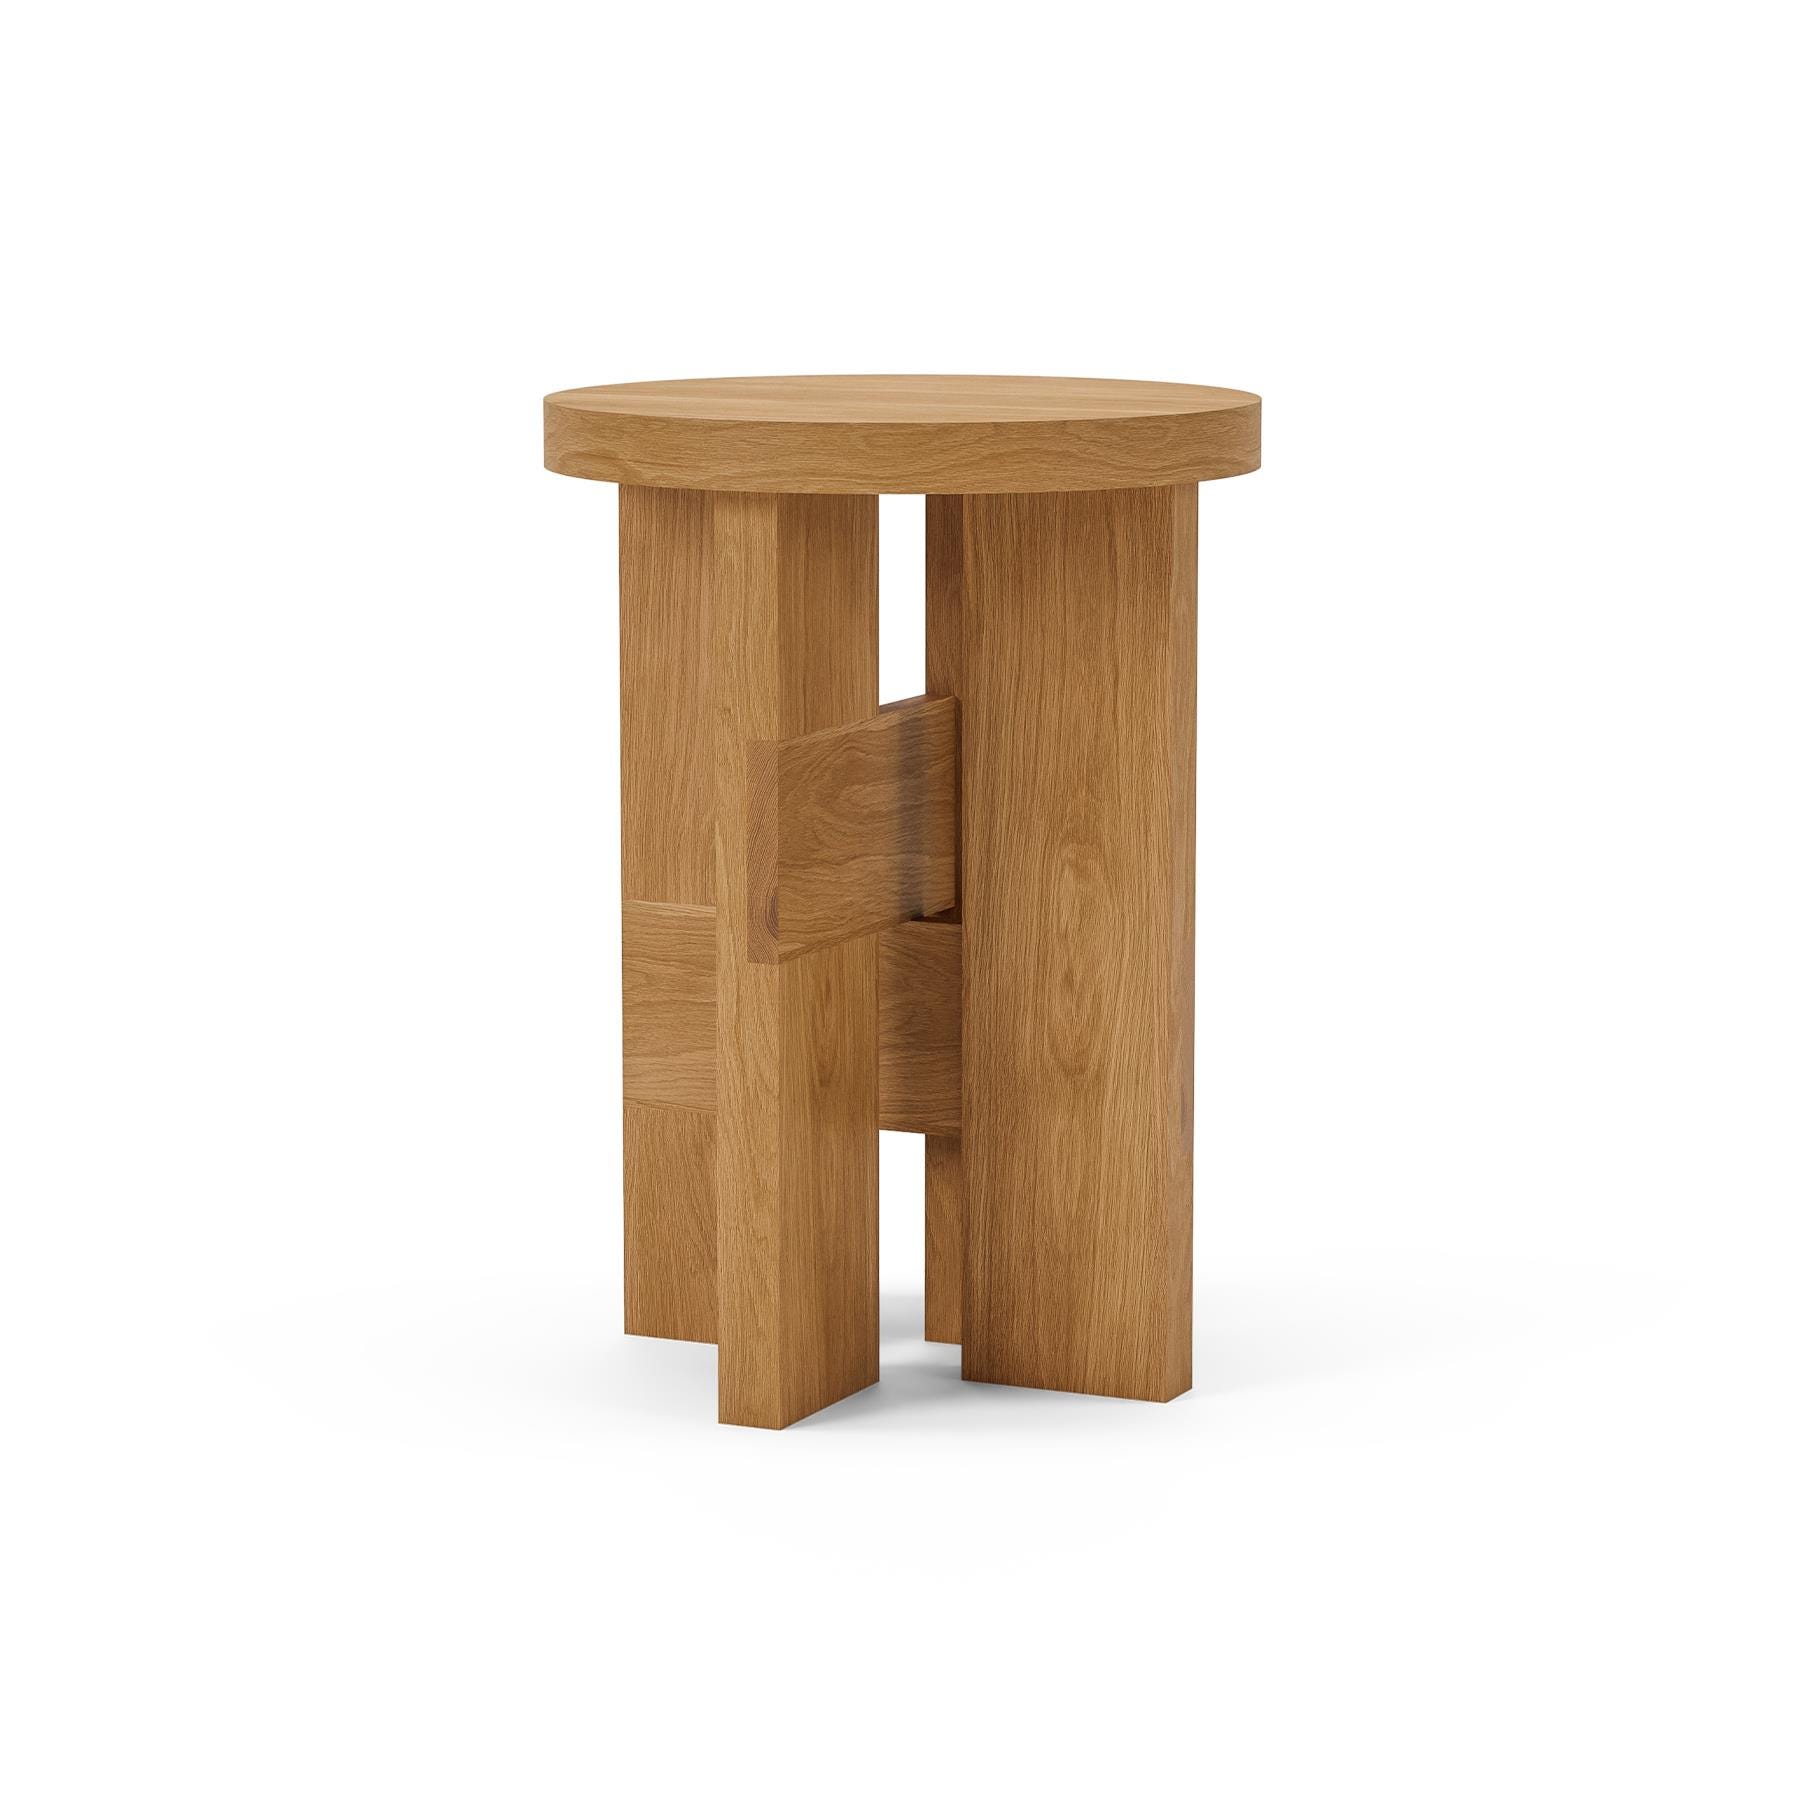 Thorup Copenhagen Mio Stool And Side Table Light Wood Designer Furniture From Holloways Of Ludlow